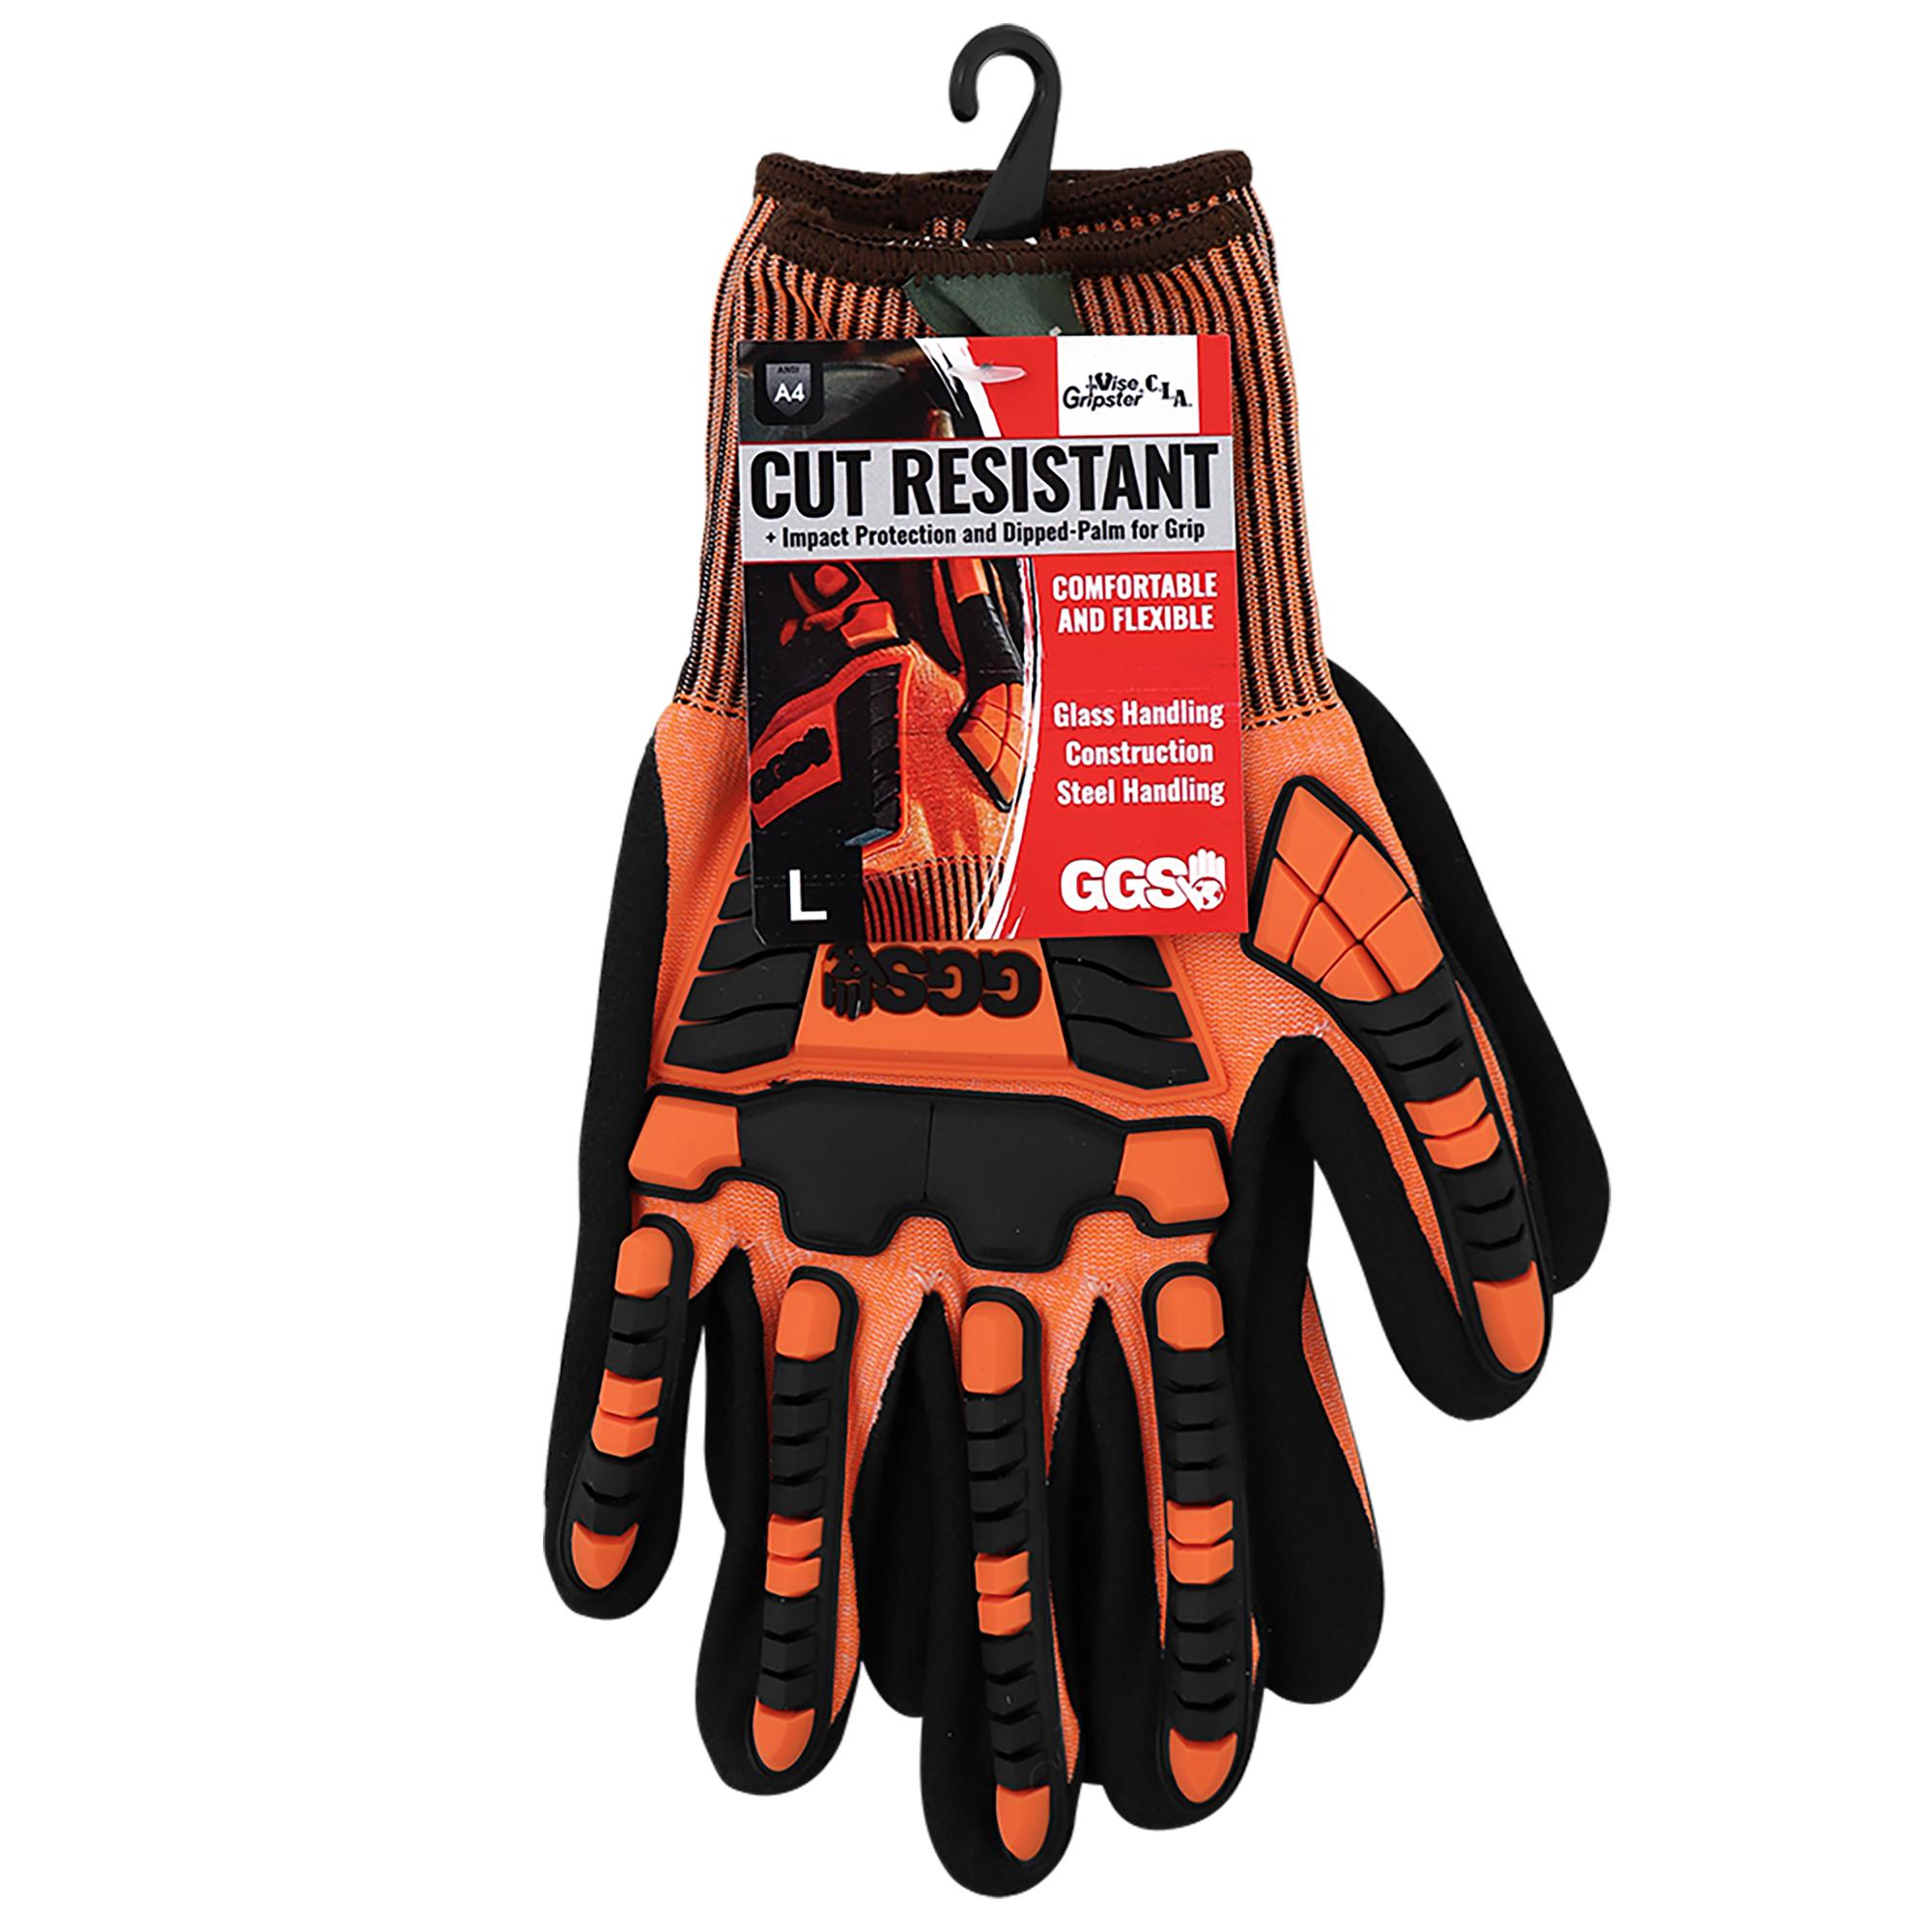 Global Glove Gripster High Visibility Etched Rubber Dipped Gloves - Large - 300NB